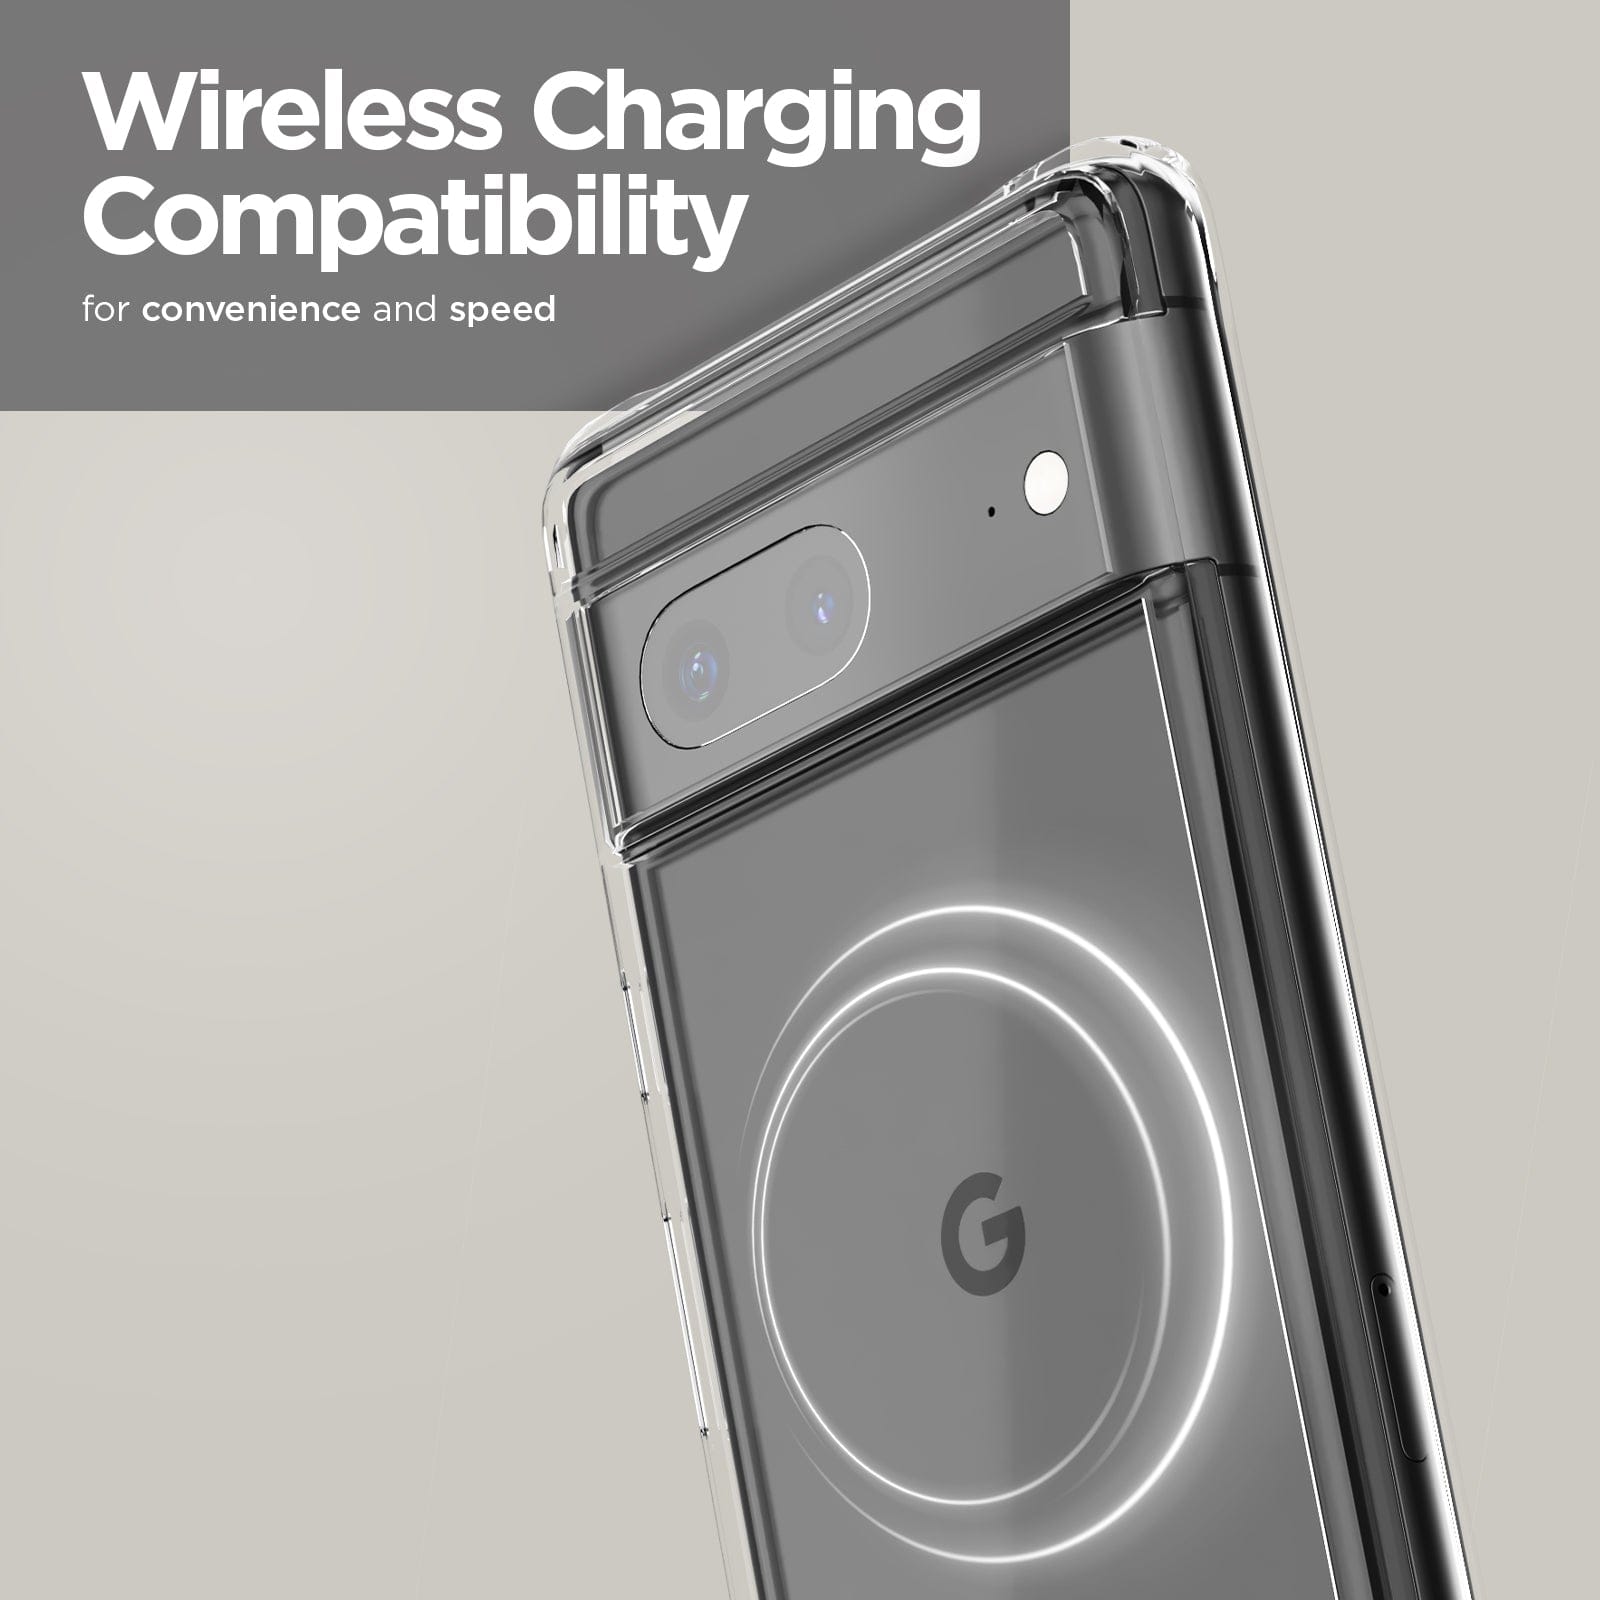 Wireless Charging Compatibility for convenience and speed.